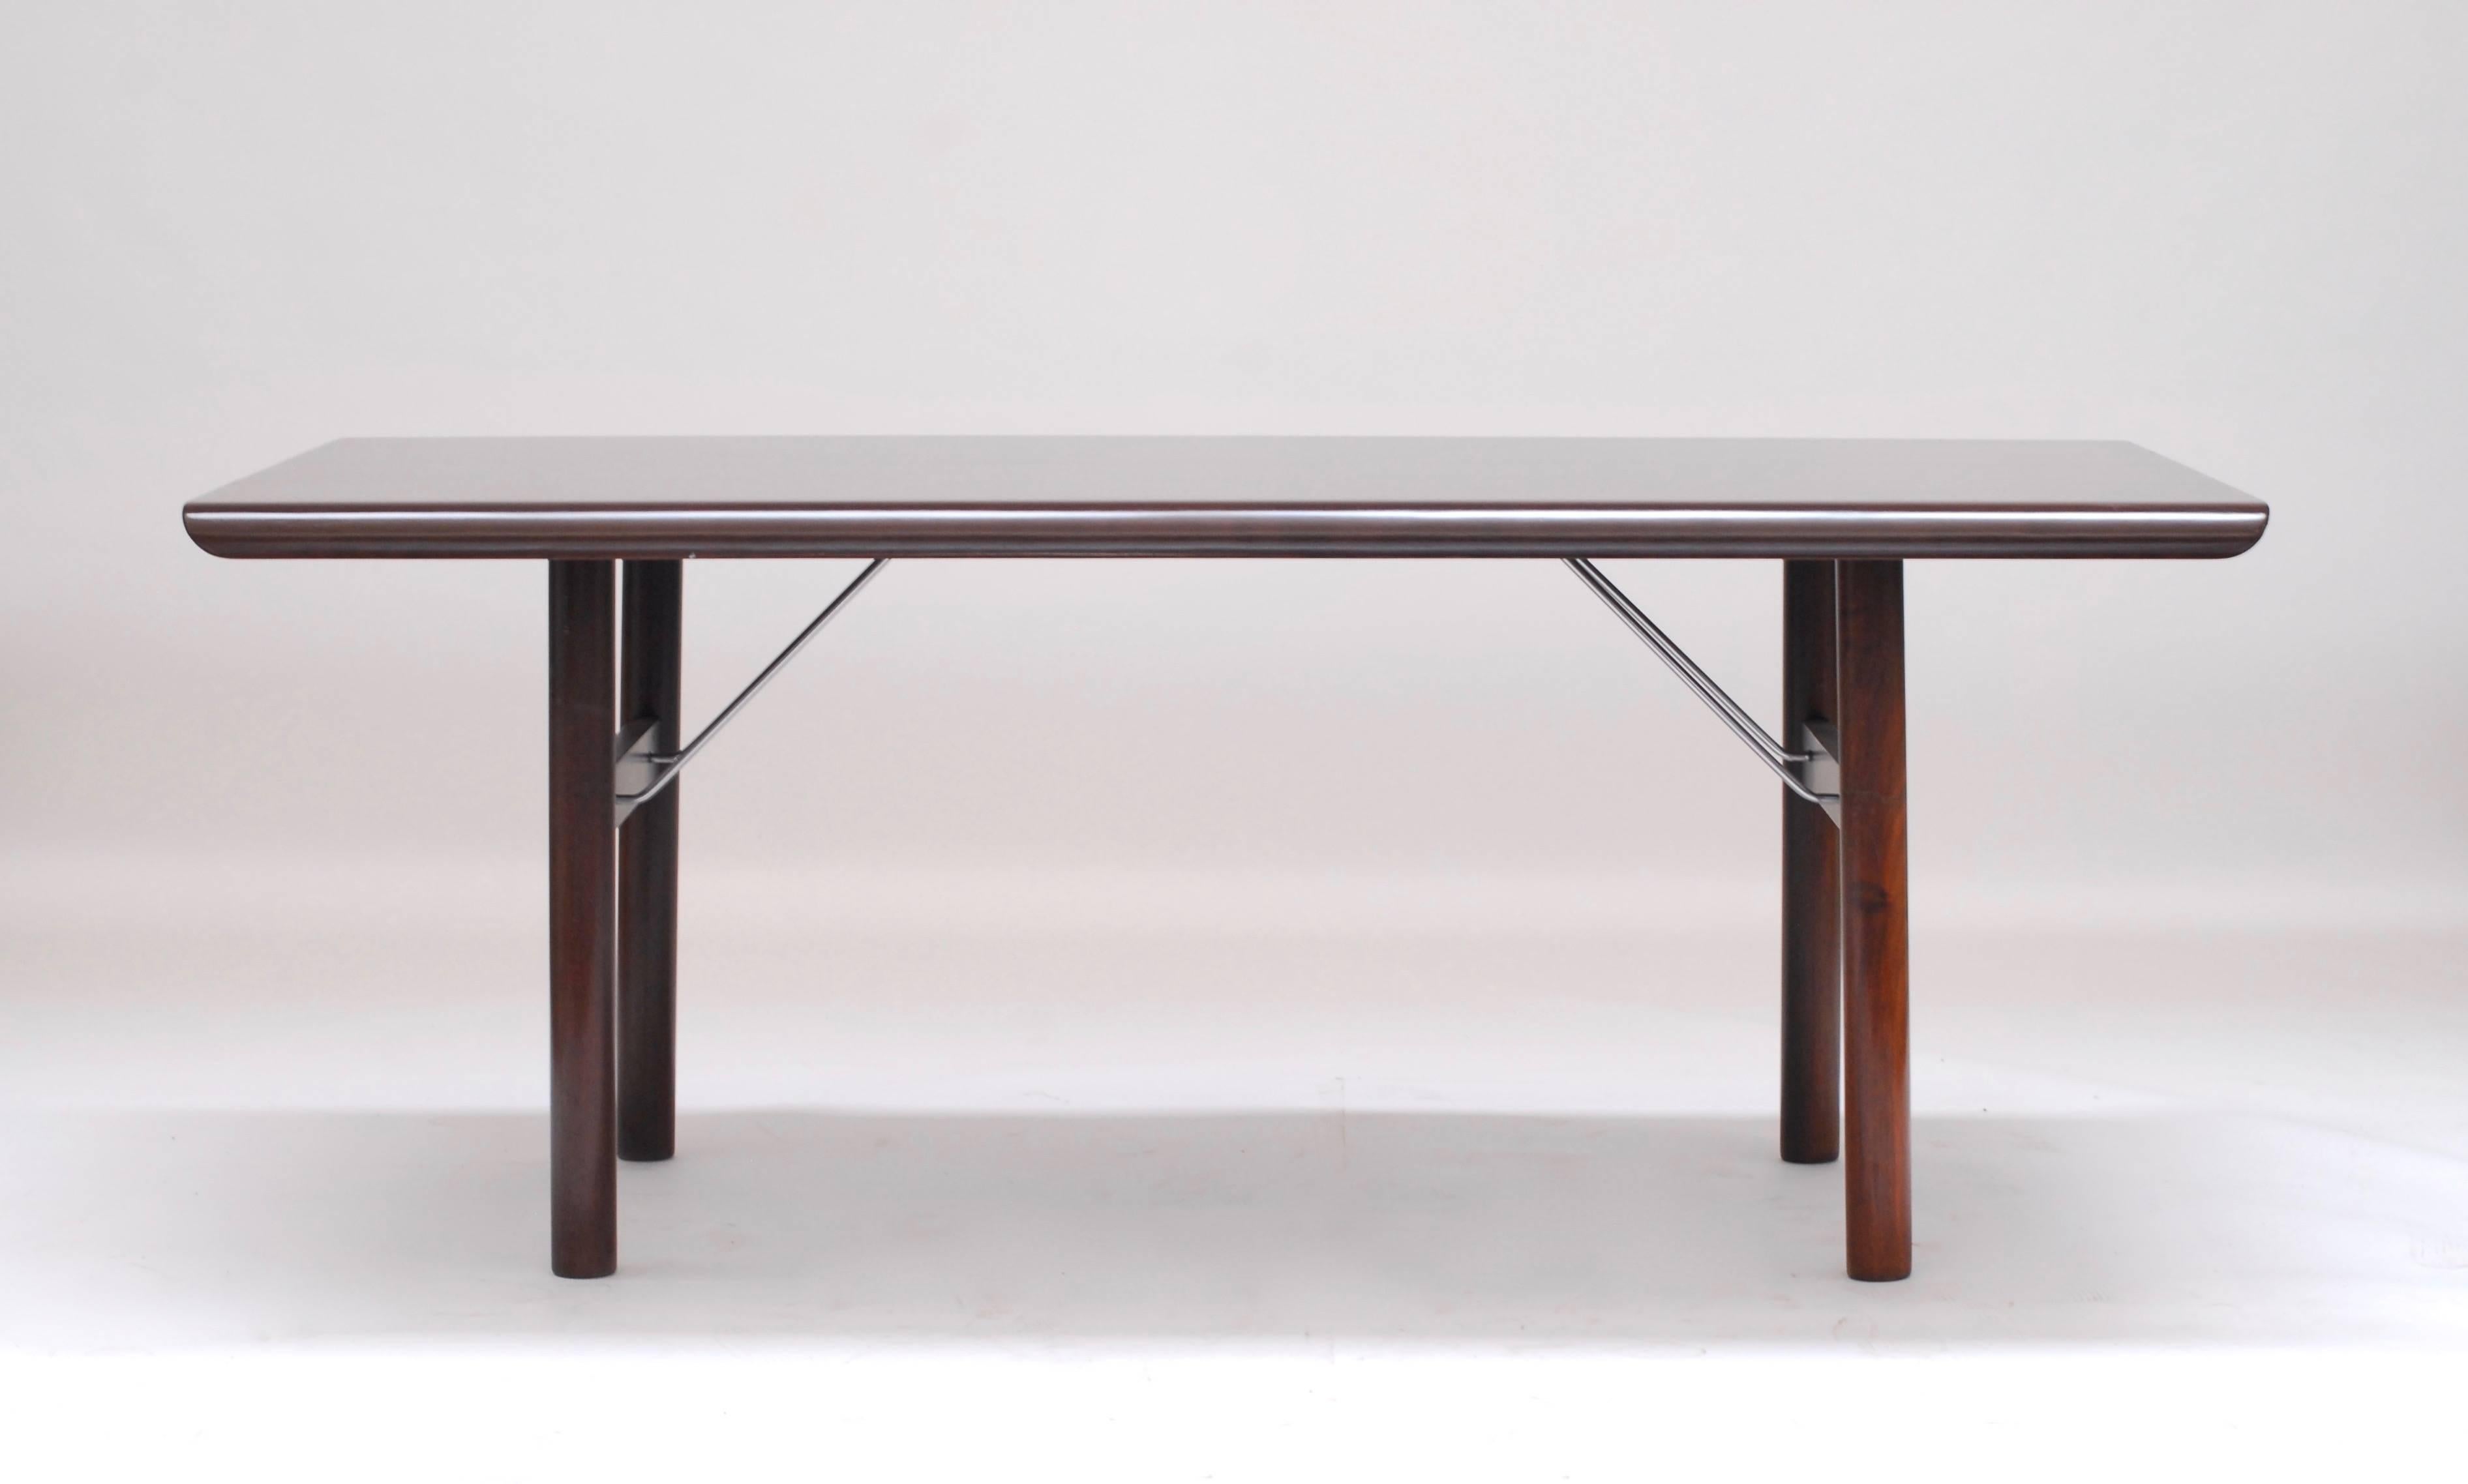 An outstanding dining rosewood table named "GAPI", which was a product manufactured by Anonima Castelli many years ago and no longer in production. "GAPI" stands for Gamberini & Piretti, i.e. a table by the two designers from